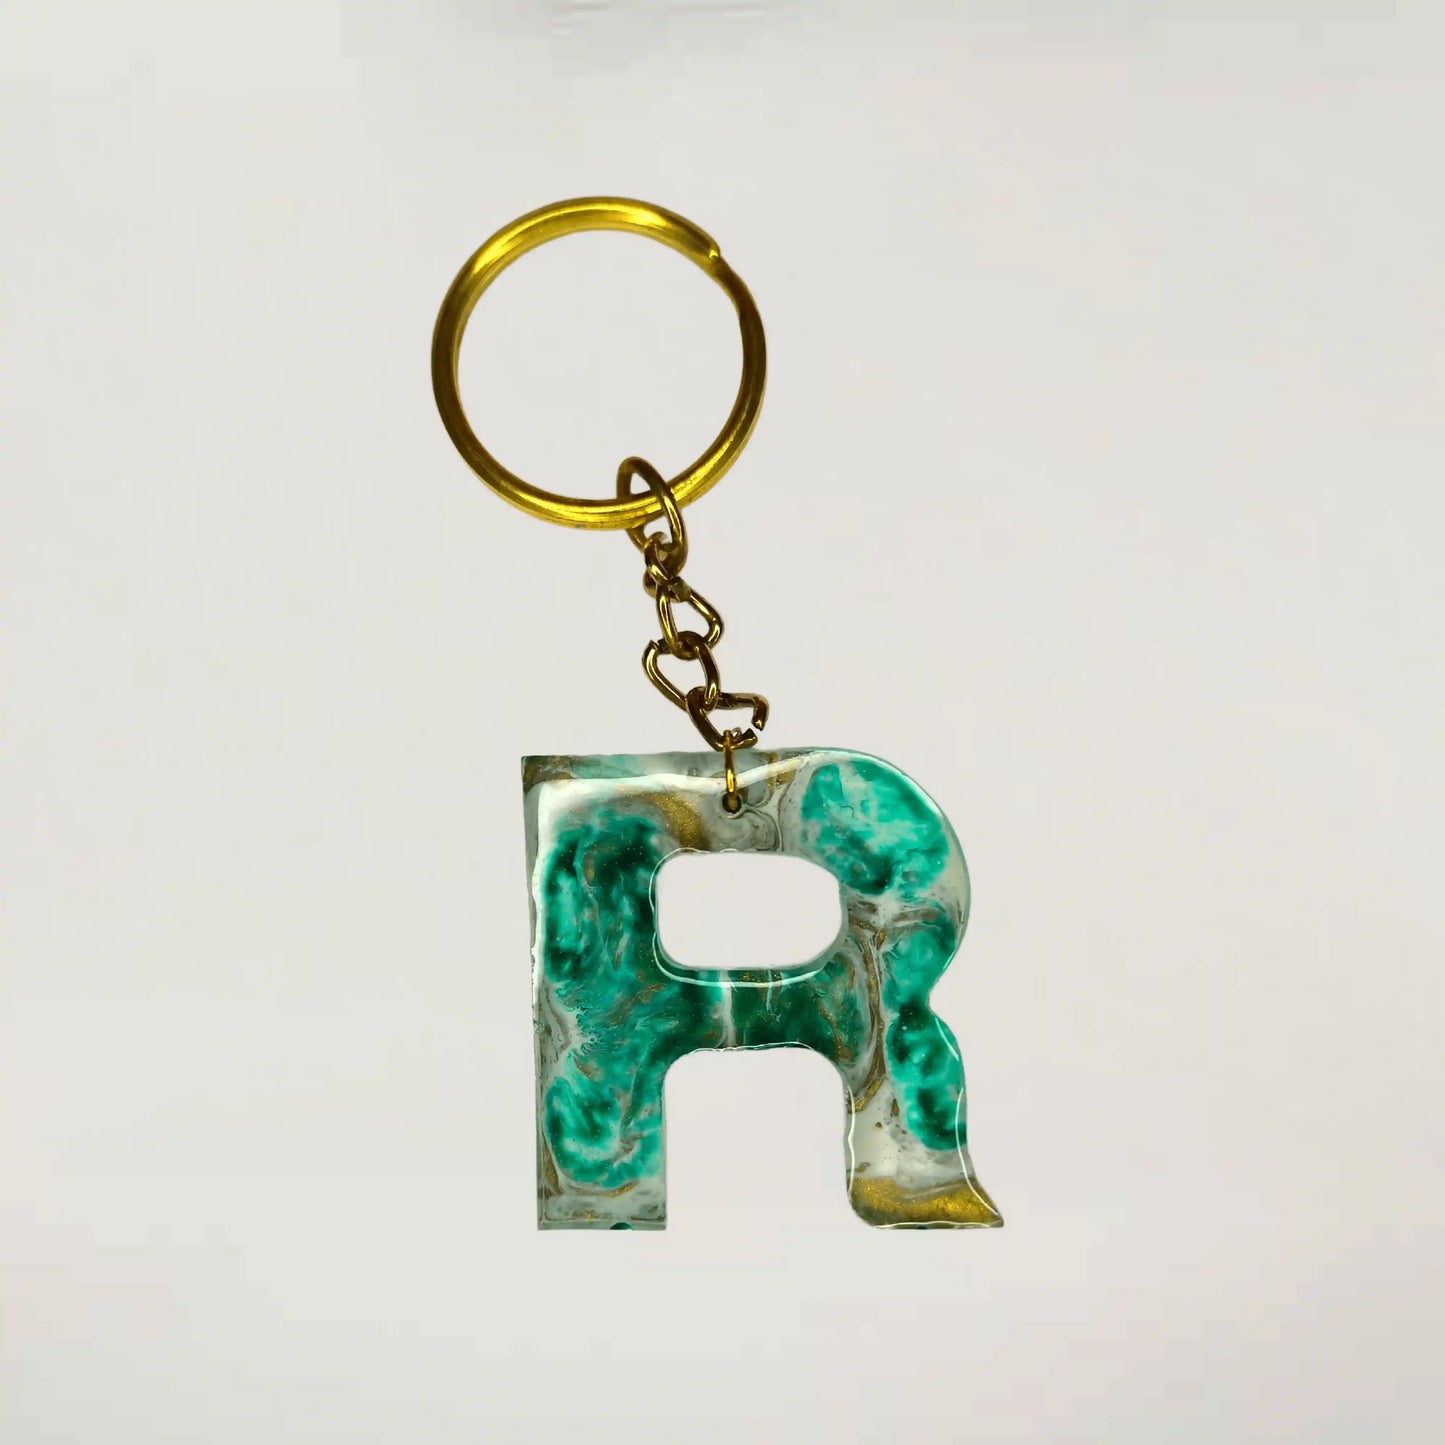 Shop Trendy Geode Resin Keychains with beautiful R initials for Car & Bike